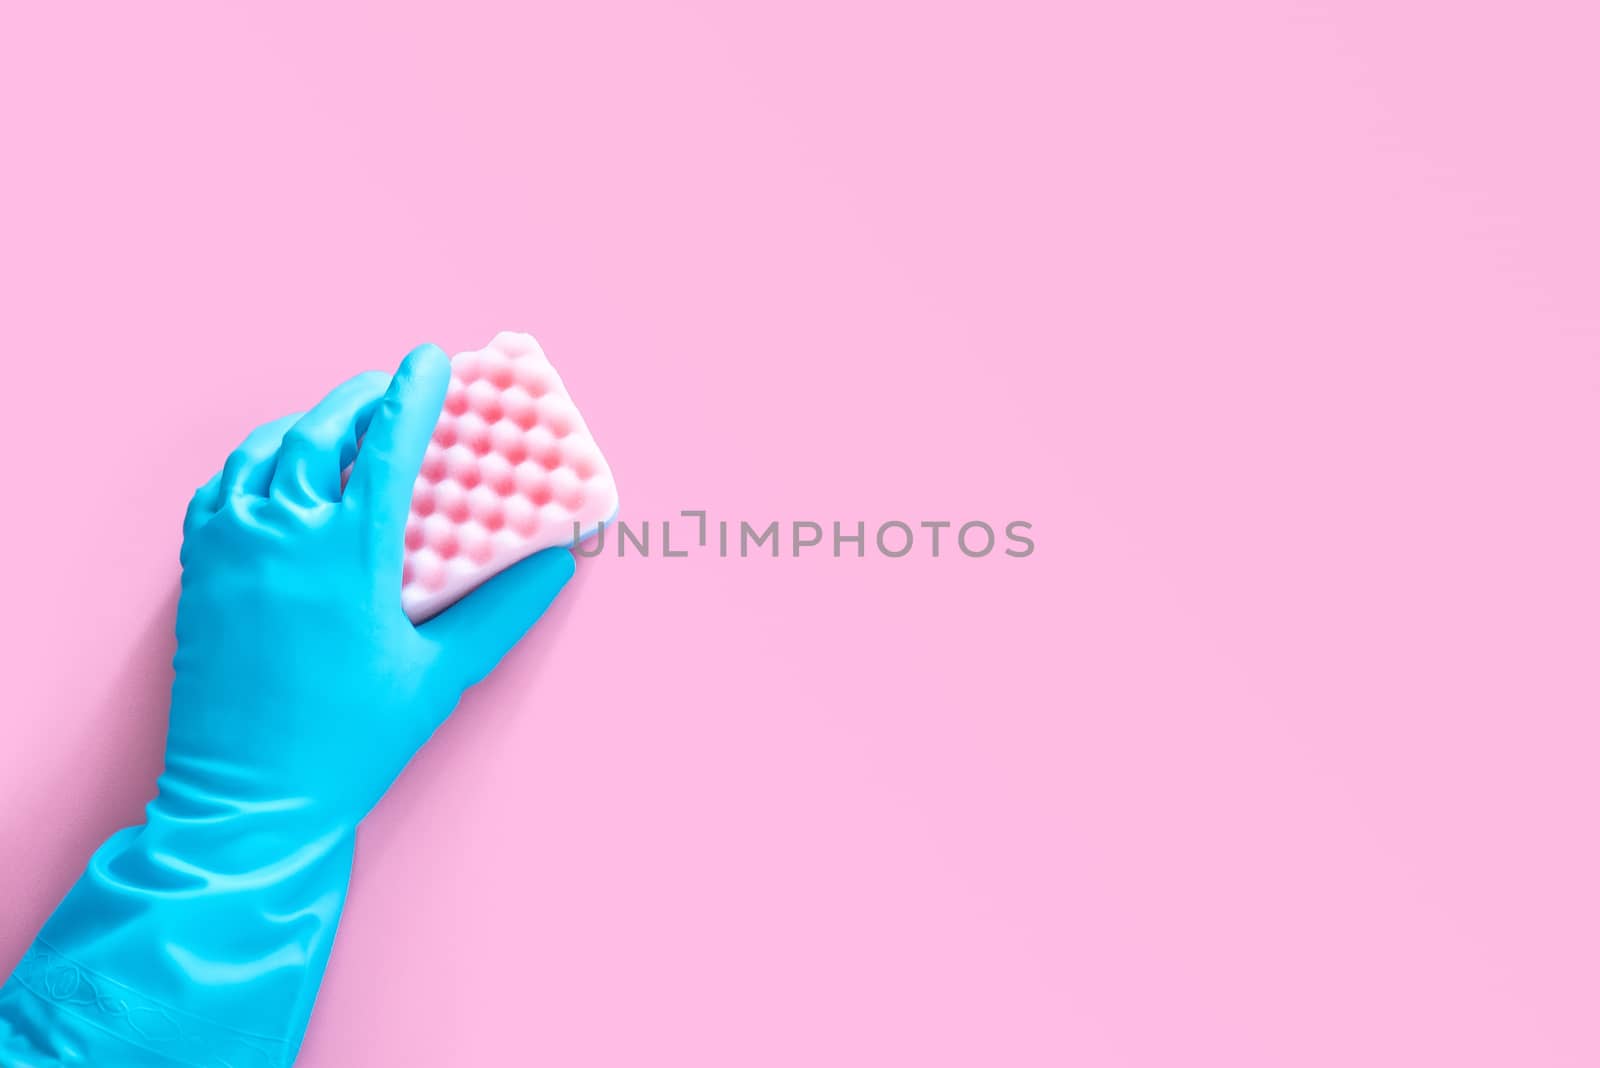 hand in blue rubber glove holding pink cleaning sponge isolated on pink background with copy space for text or logo